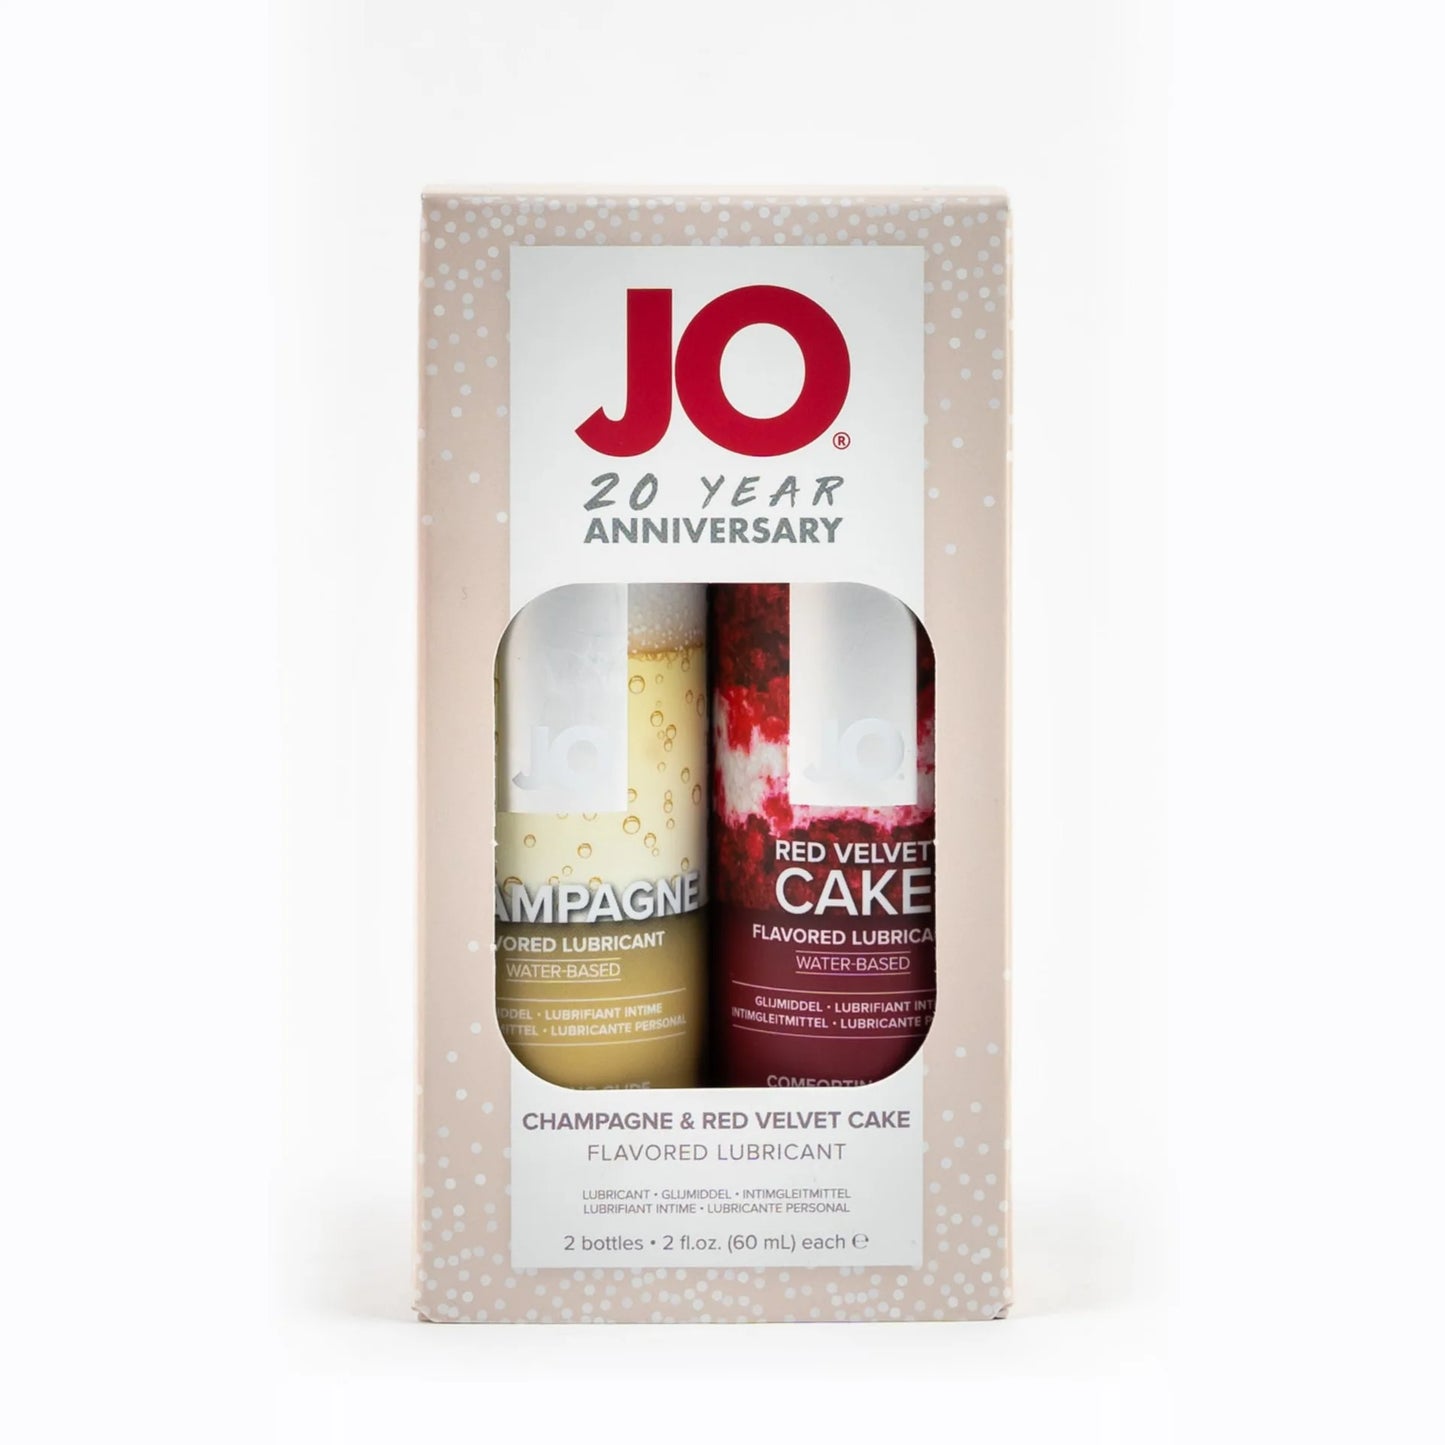 SYSTEM JO 20 YEAR ANNIVERSARY GIFT SET CHAMPAGNE AND RED VELVET